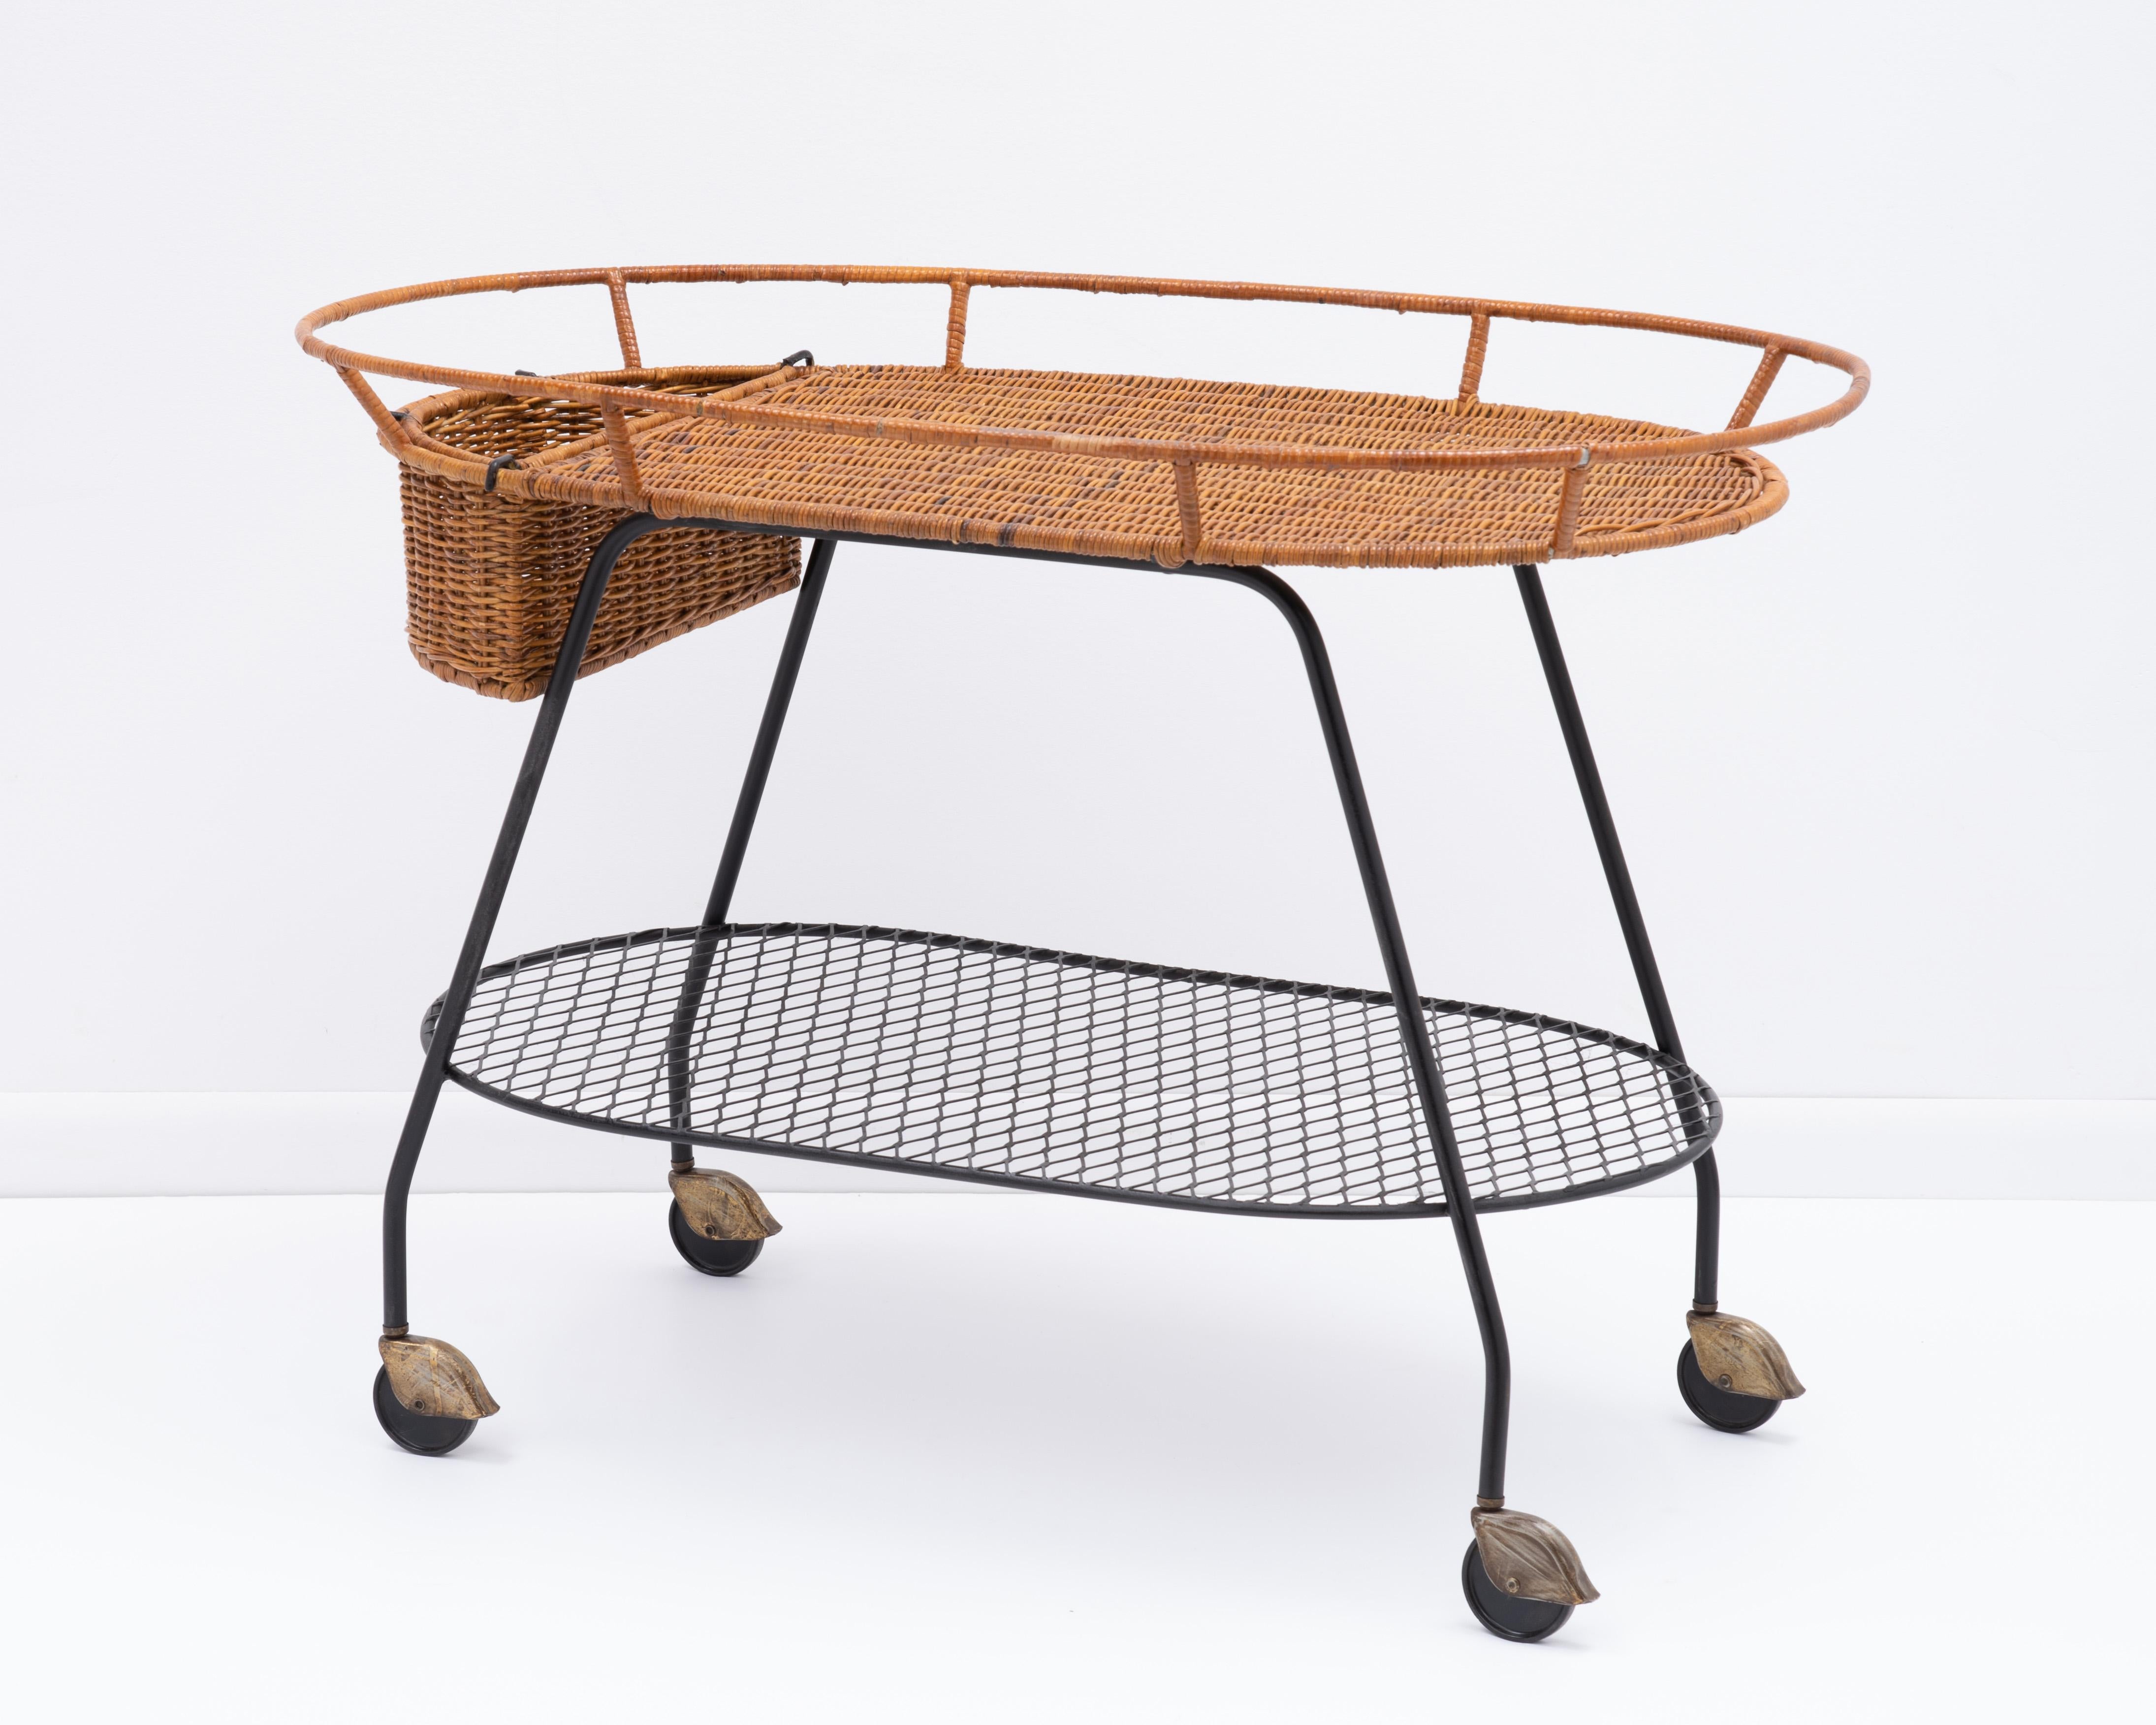 Mid-Century Modern vintage wicker and wrought iron rolling bar cart attributed to Arthur Umanoff. The two-tiered serving or tea trolley features a woven rattan top with a removable basket, a black iron lower tier, and a wrought iron frame fitted